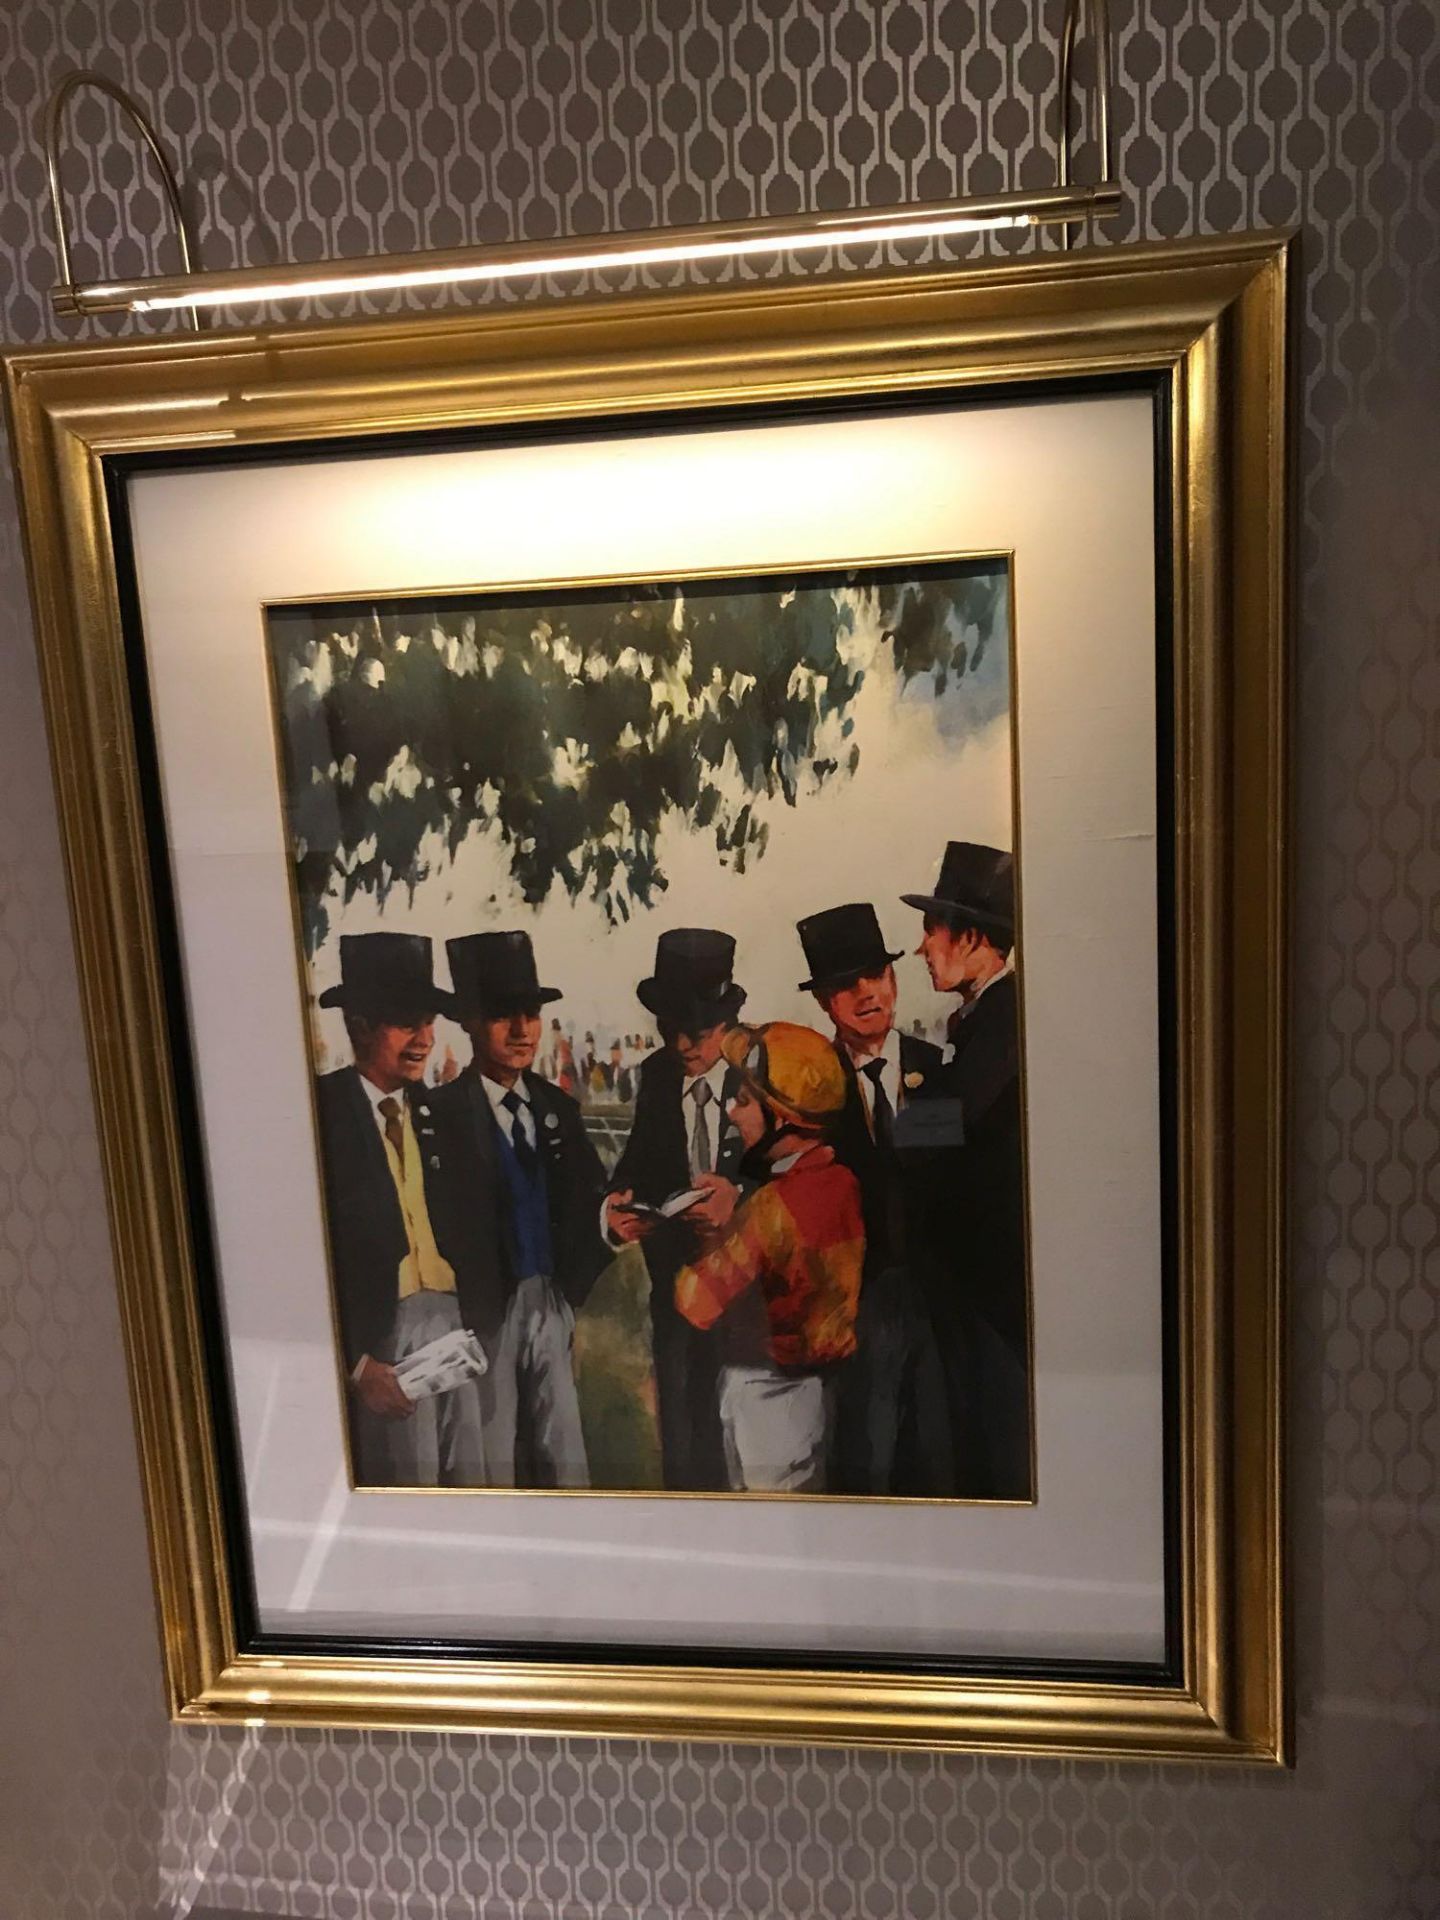 Framed Lithographic Print Illustrating A Jockey Talking To Gentleman In Morning Dress At Ascot